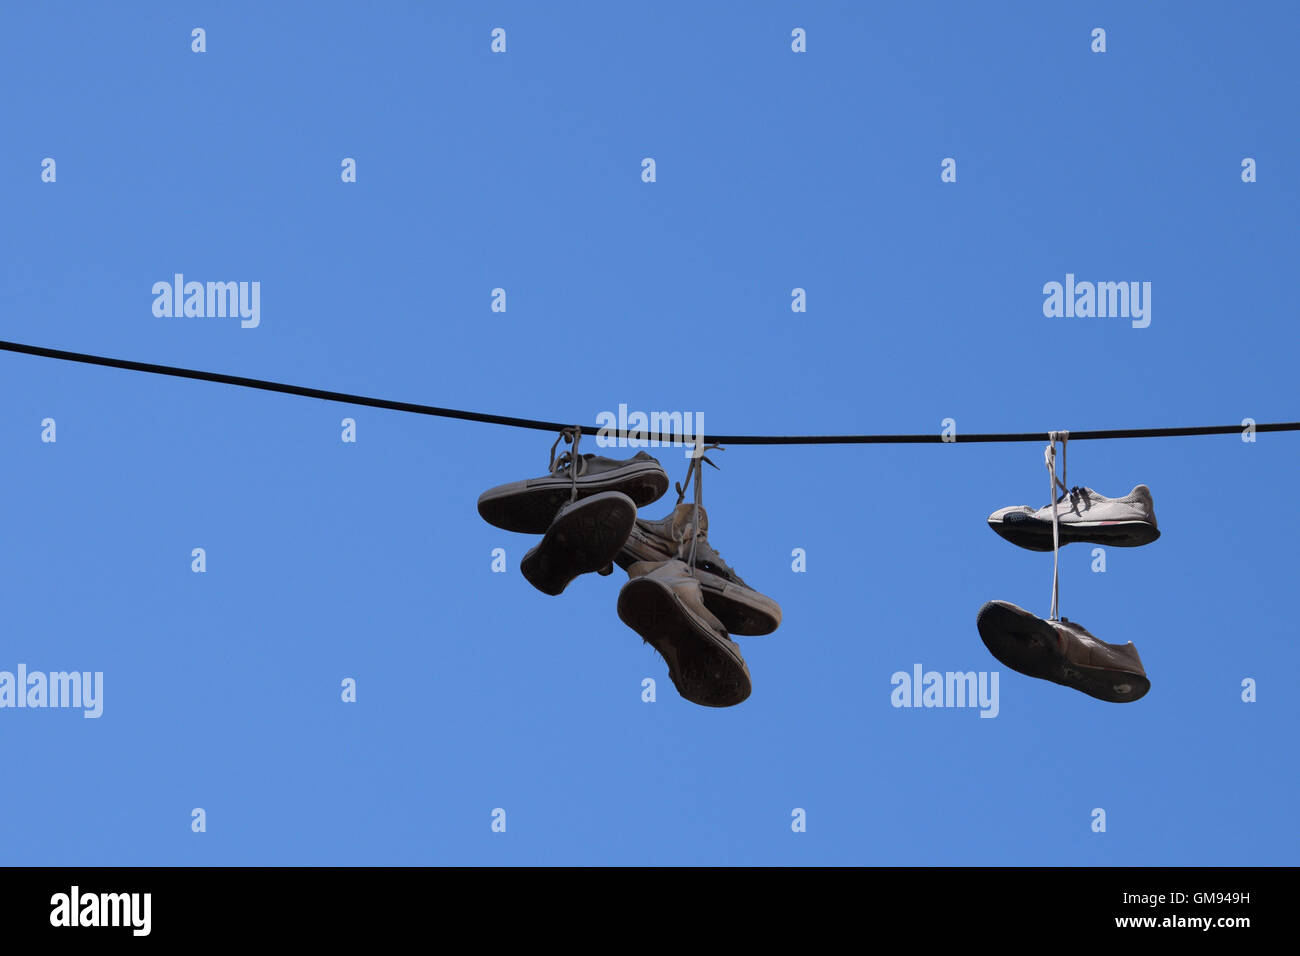 Shoe tossing old sneakers footwear with tied shoelaces hanging from a wire. Stock Photo